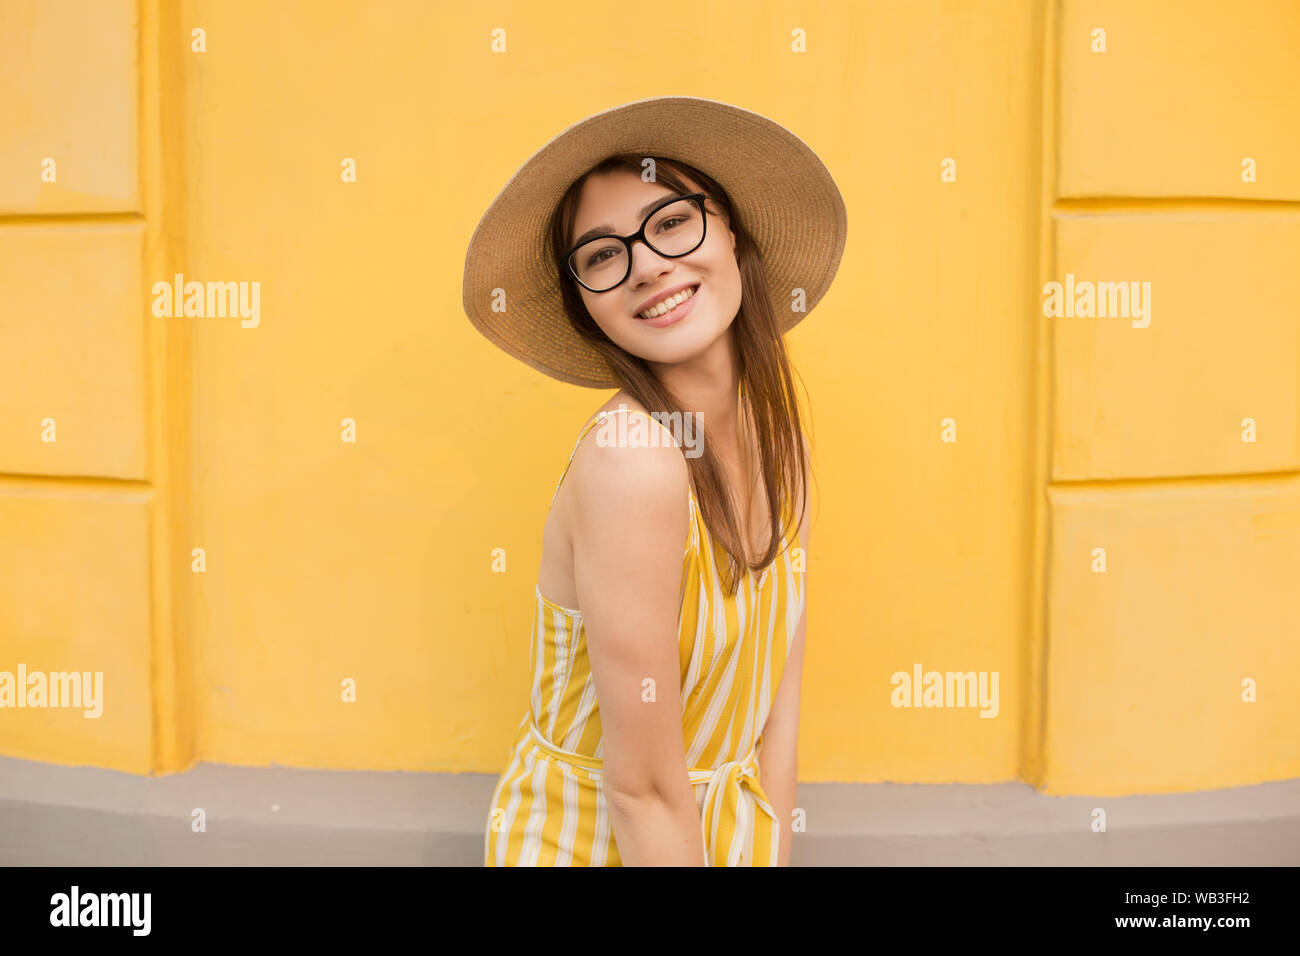 Fashion woman in stylish clothes on a background of a yellow wall. Bright photo with emotions. copy space Stock Photo